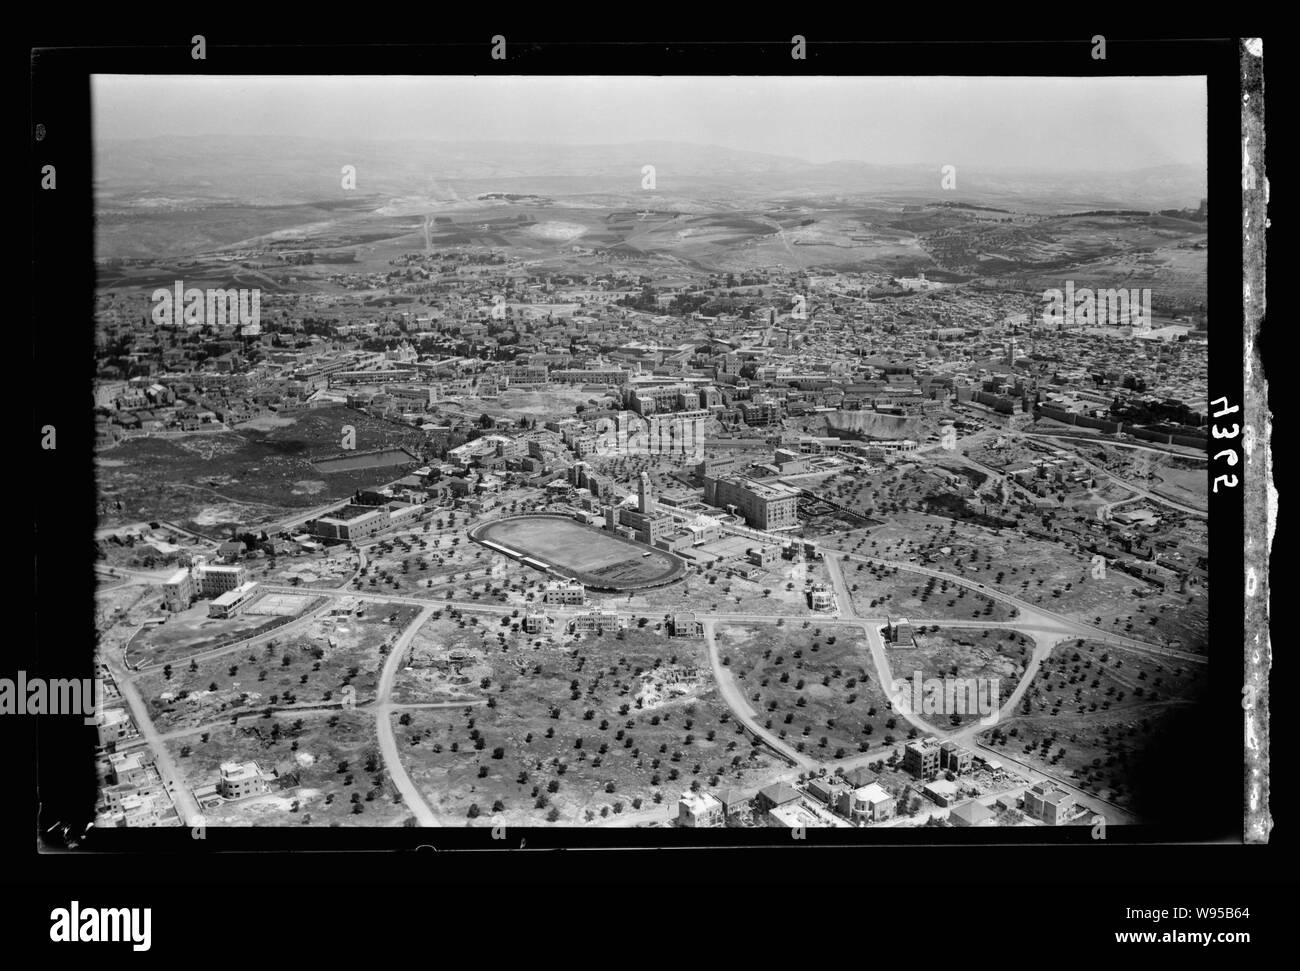 Air views of Palestine. Jerusalem from the air. Newer Jerusalem. The Y.M.C.A. section. Looking N.E. over city Stock Photo